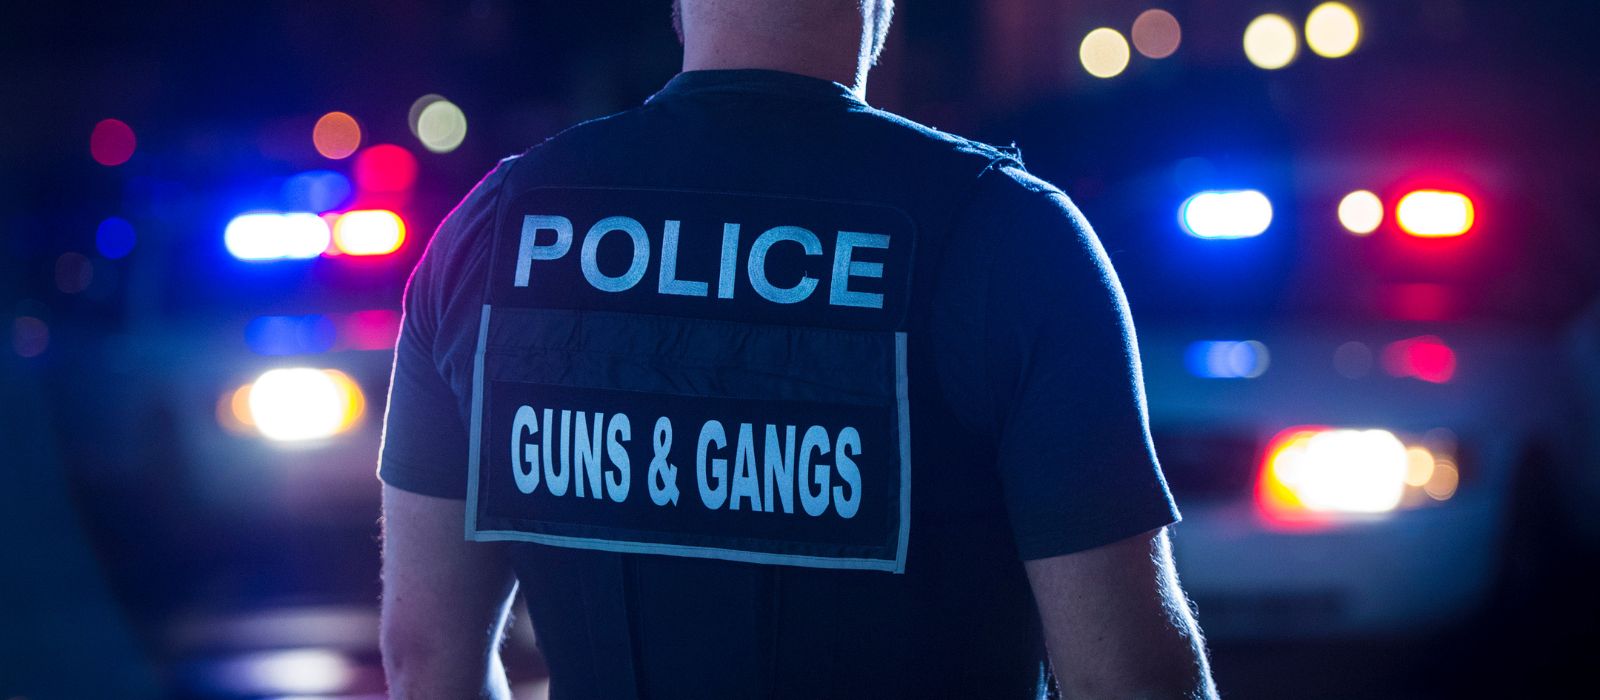 A member of the Guns and Gangs Units stands in front of two police cruisers at night.